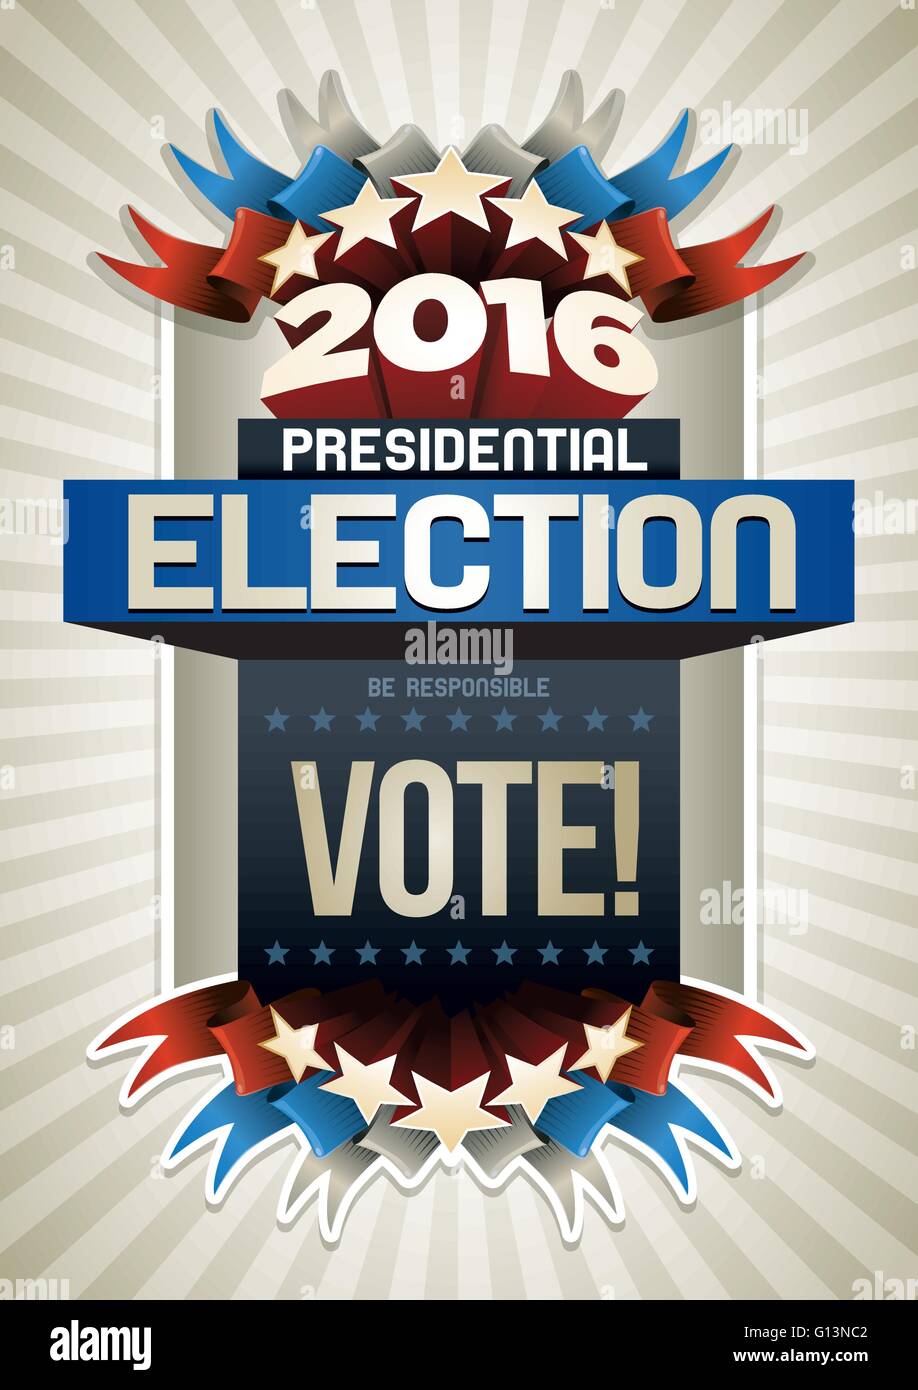 Year 2016 Presidential Election Poster Design. Elements are layered separately in vector file. Stock Vector